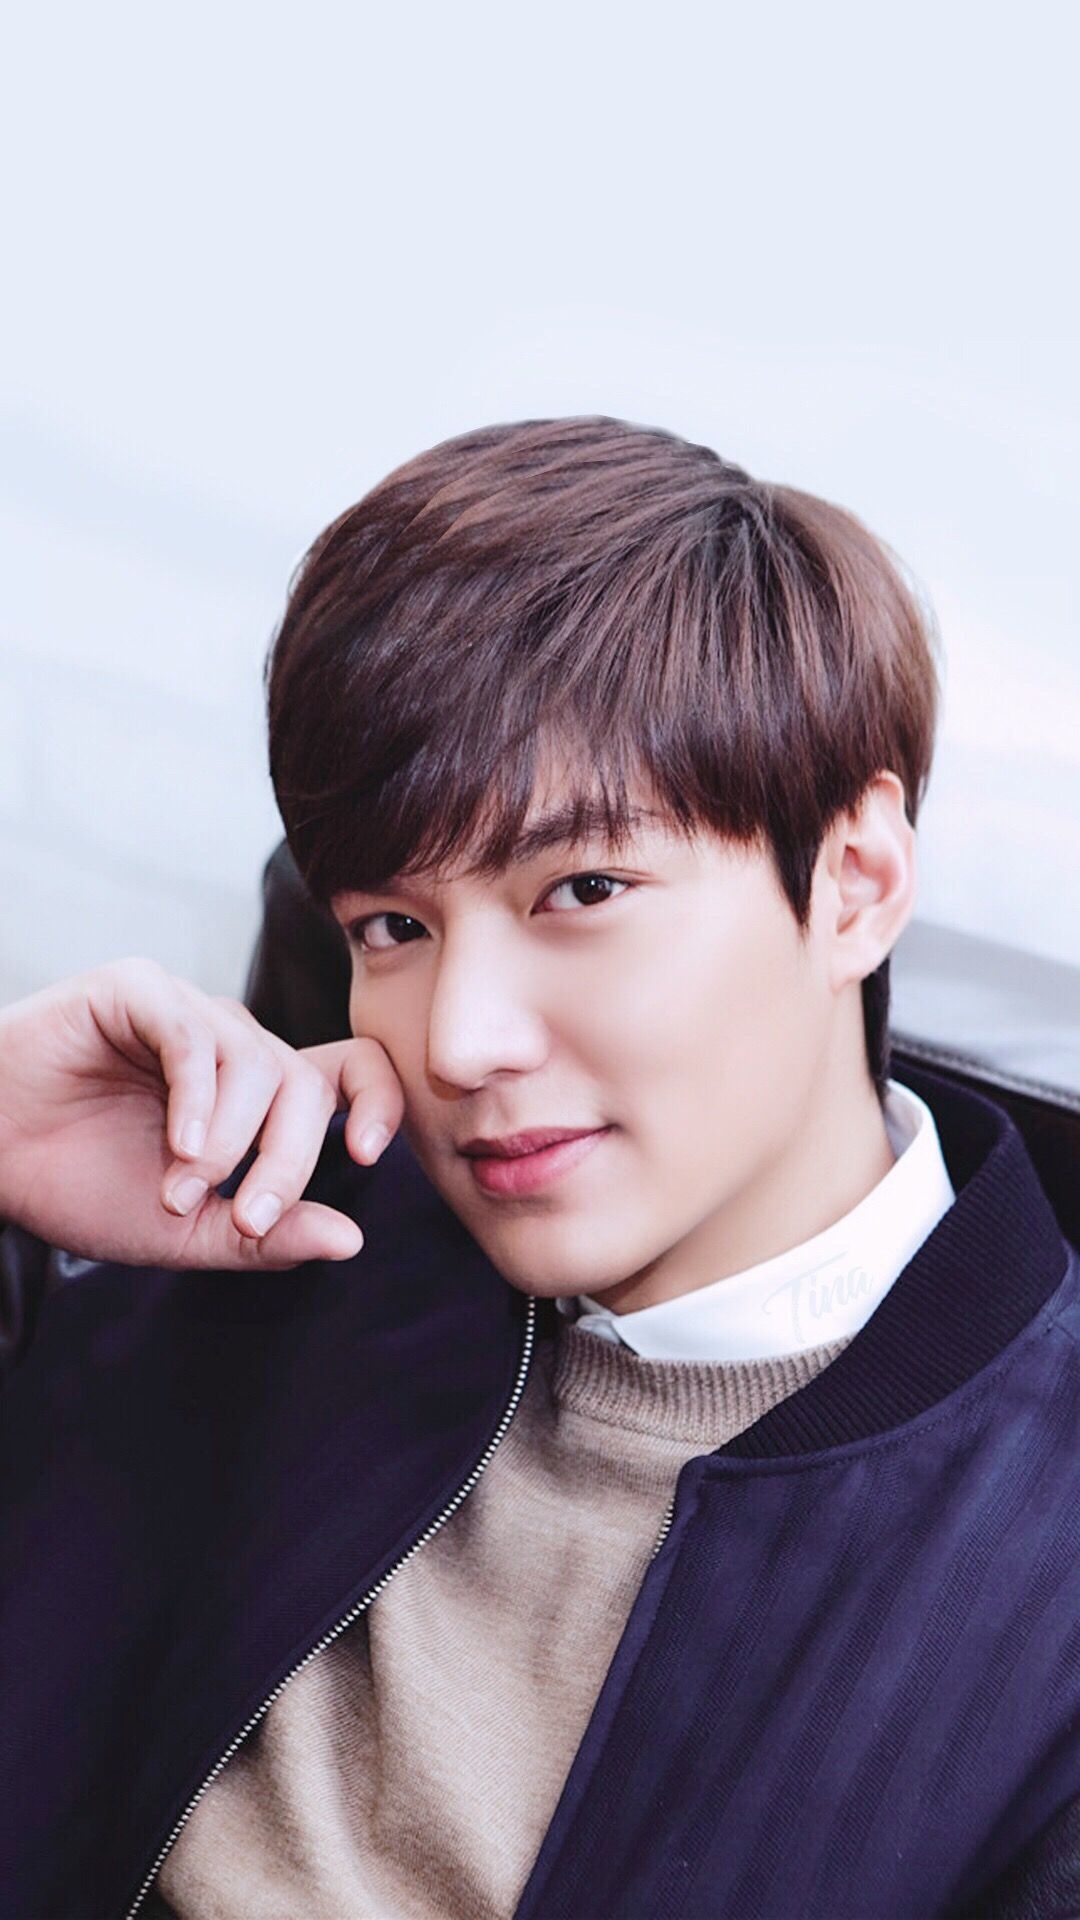 Lee Min-ho: The first K-idol to cross 20m-follower mark on both Instagram and Facebook. 1080x1920 Full HD Wallpaper.